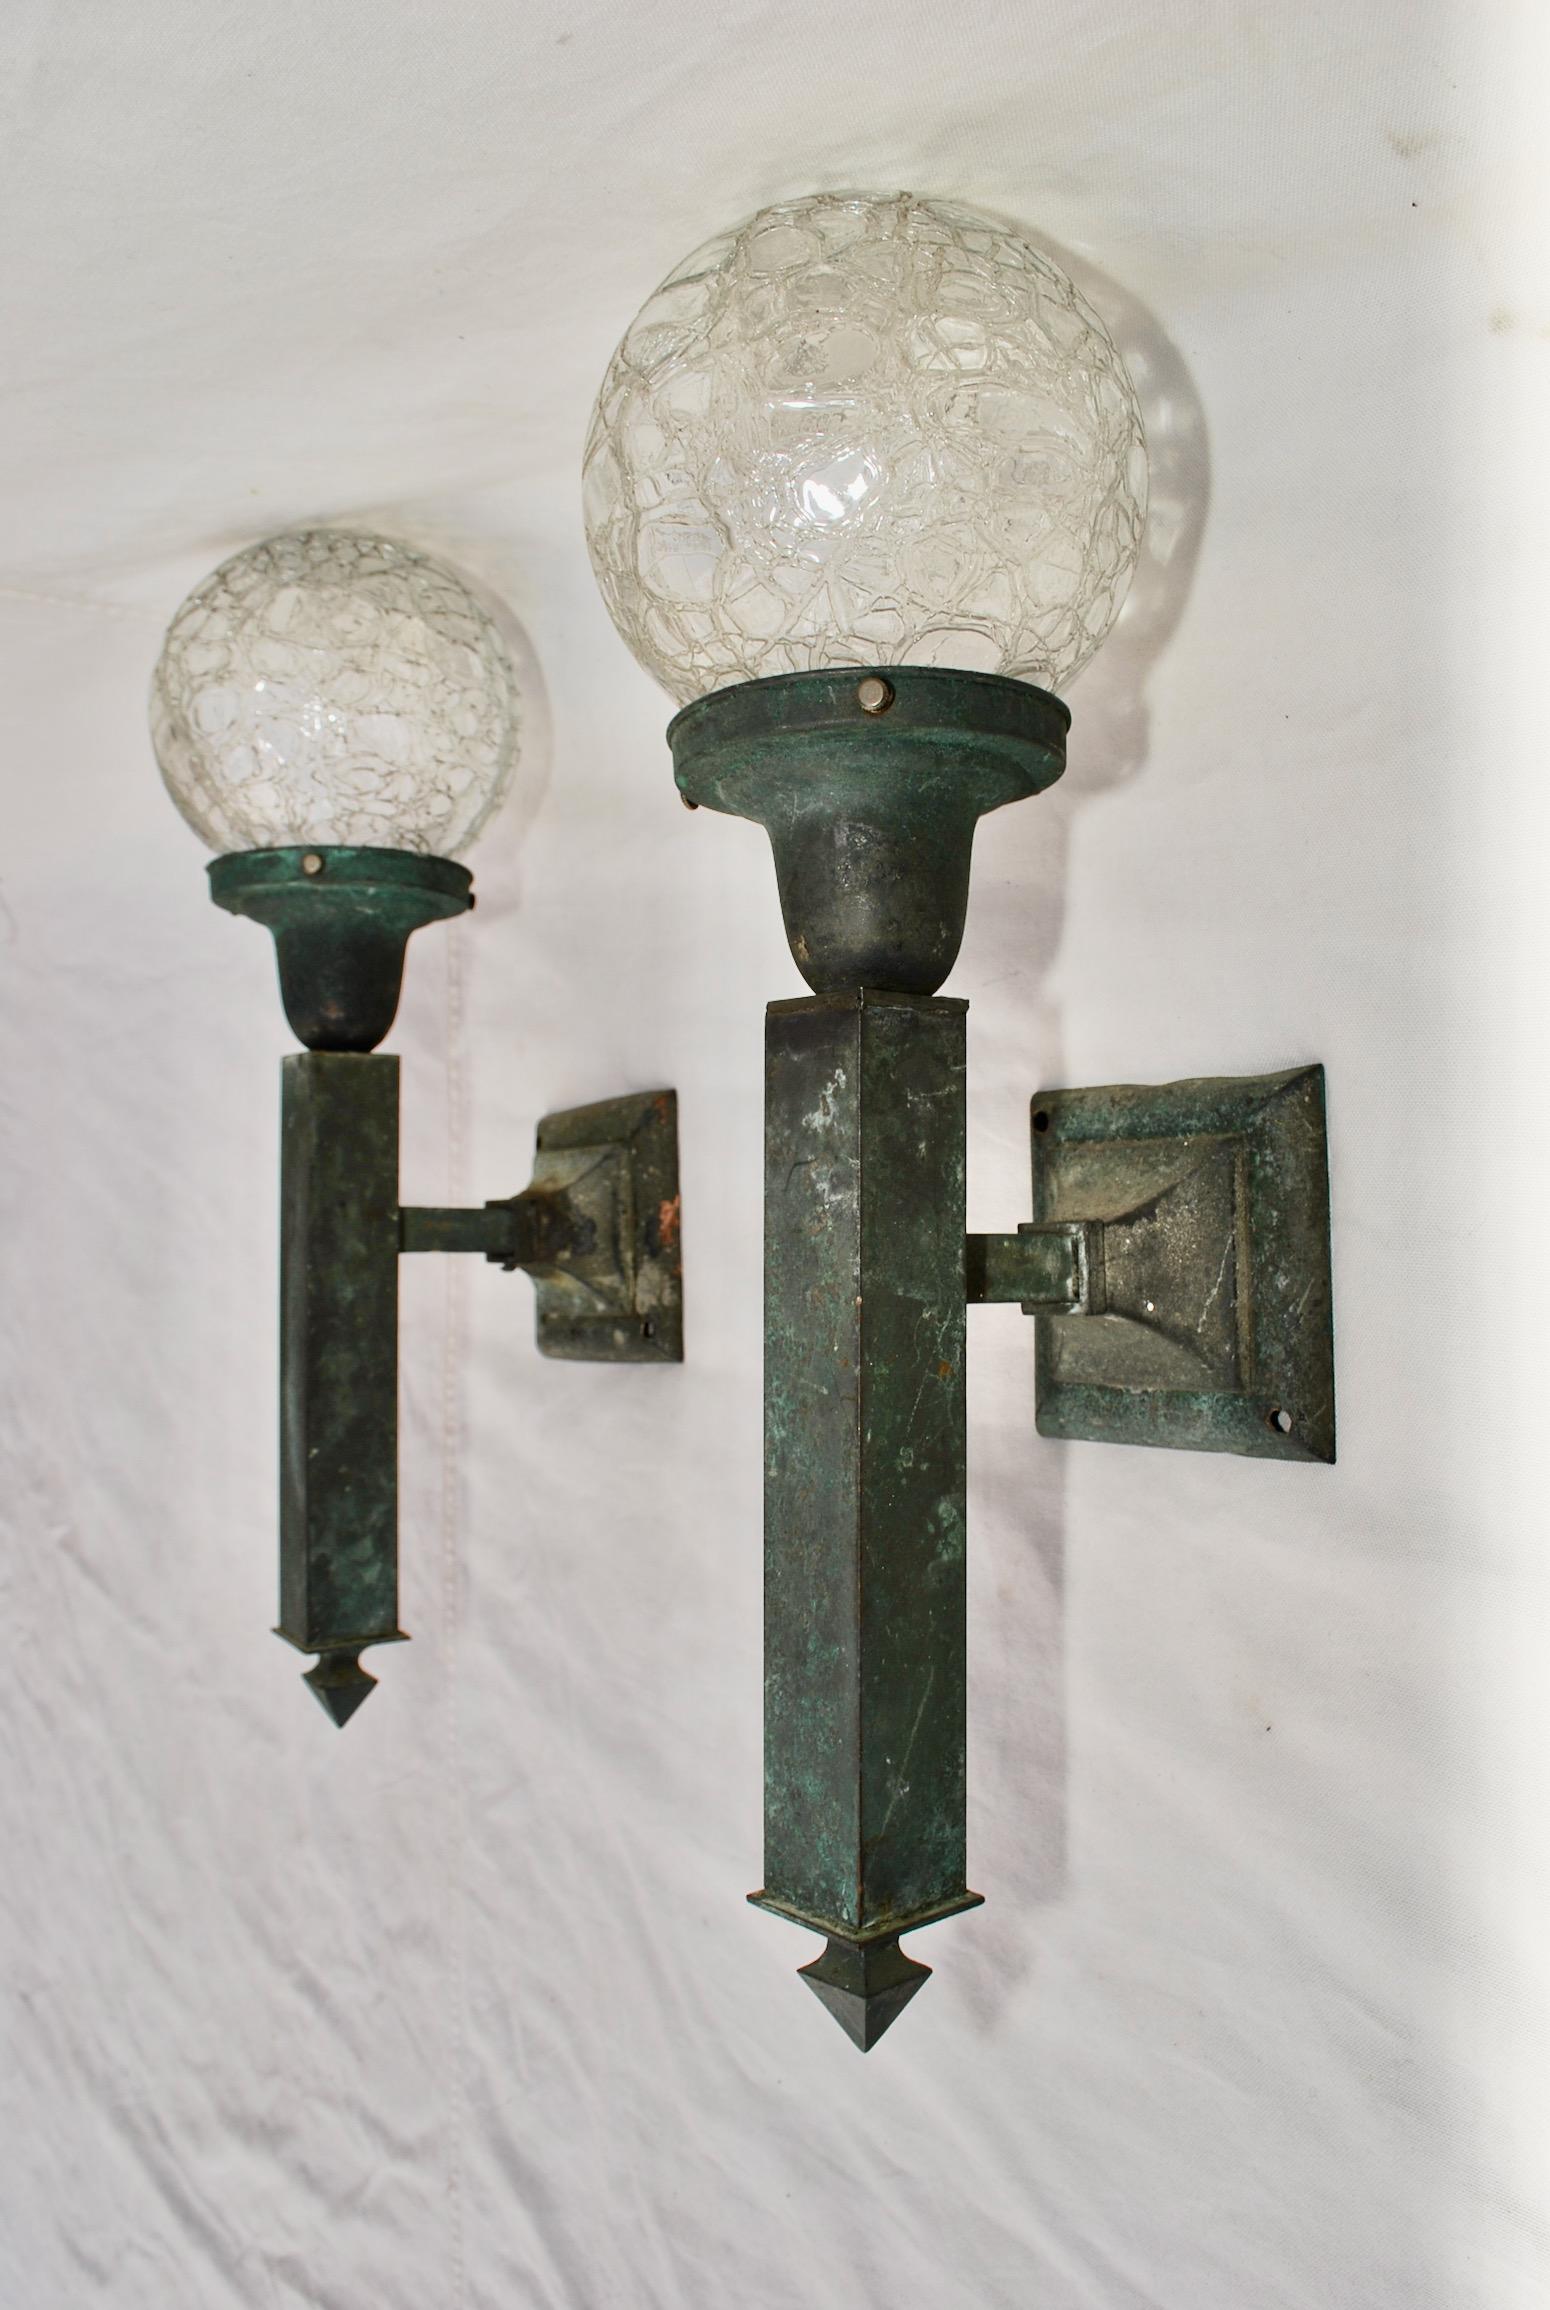 These are quite rare, they can be with Arts & Crafts style or craftsman style, the patina is nicer in person.